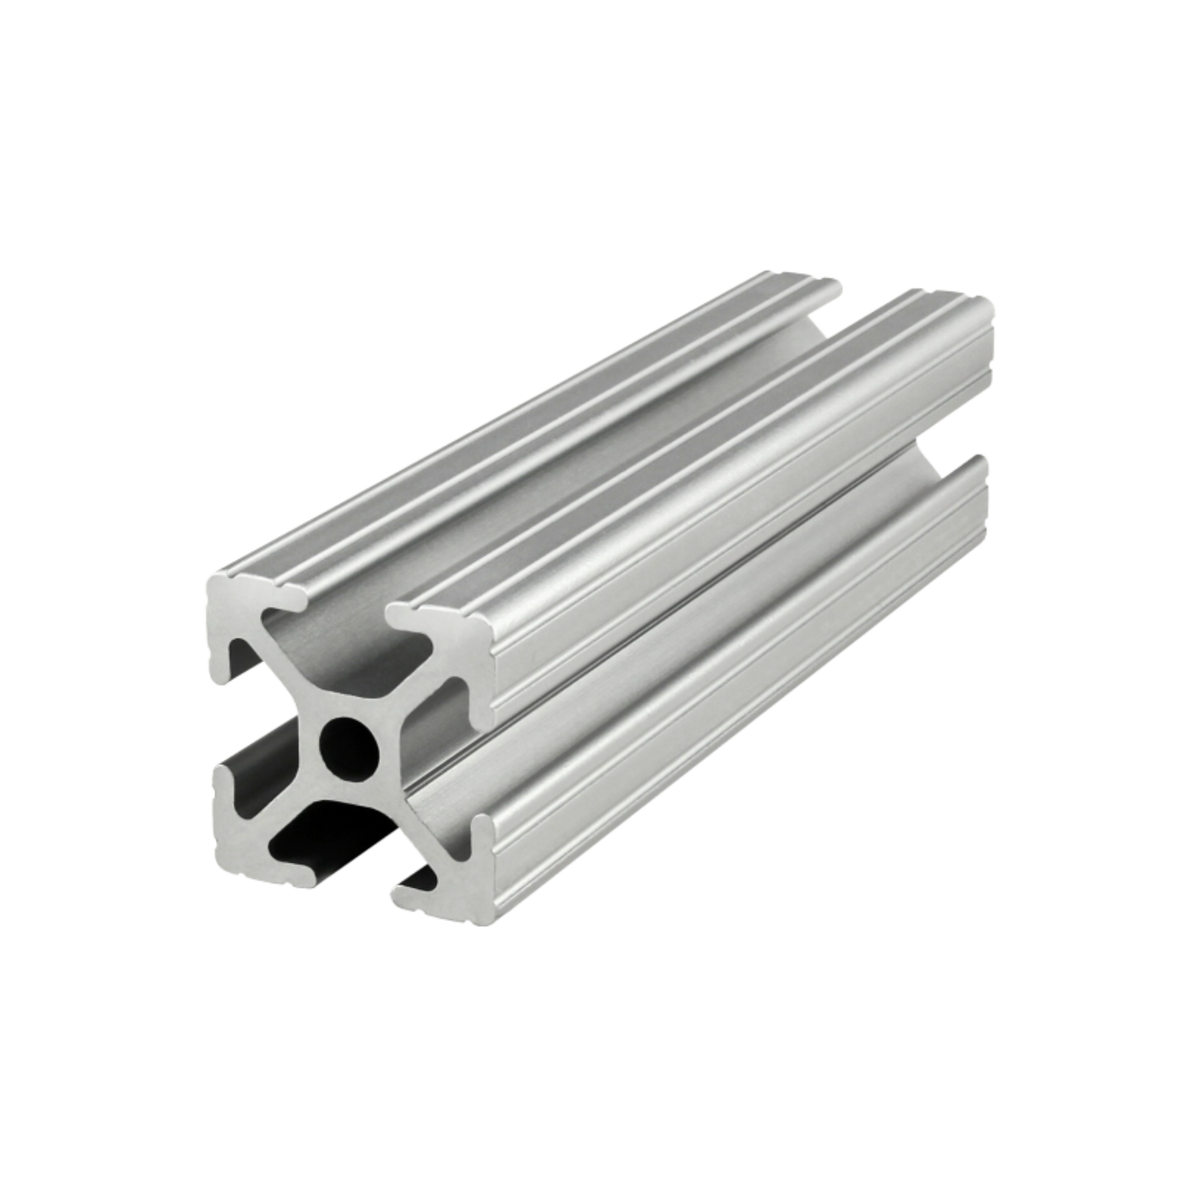 front side view of a metal bar with square edges and a T-slot on each of the four sides